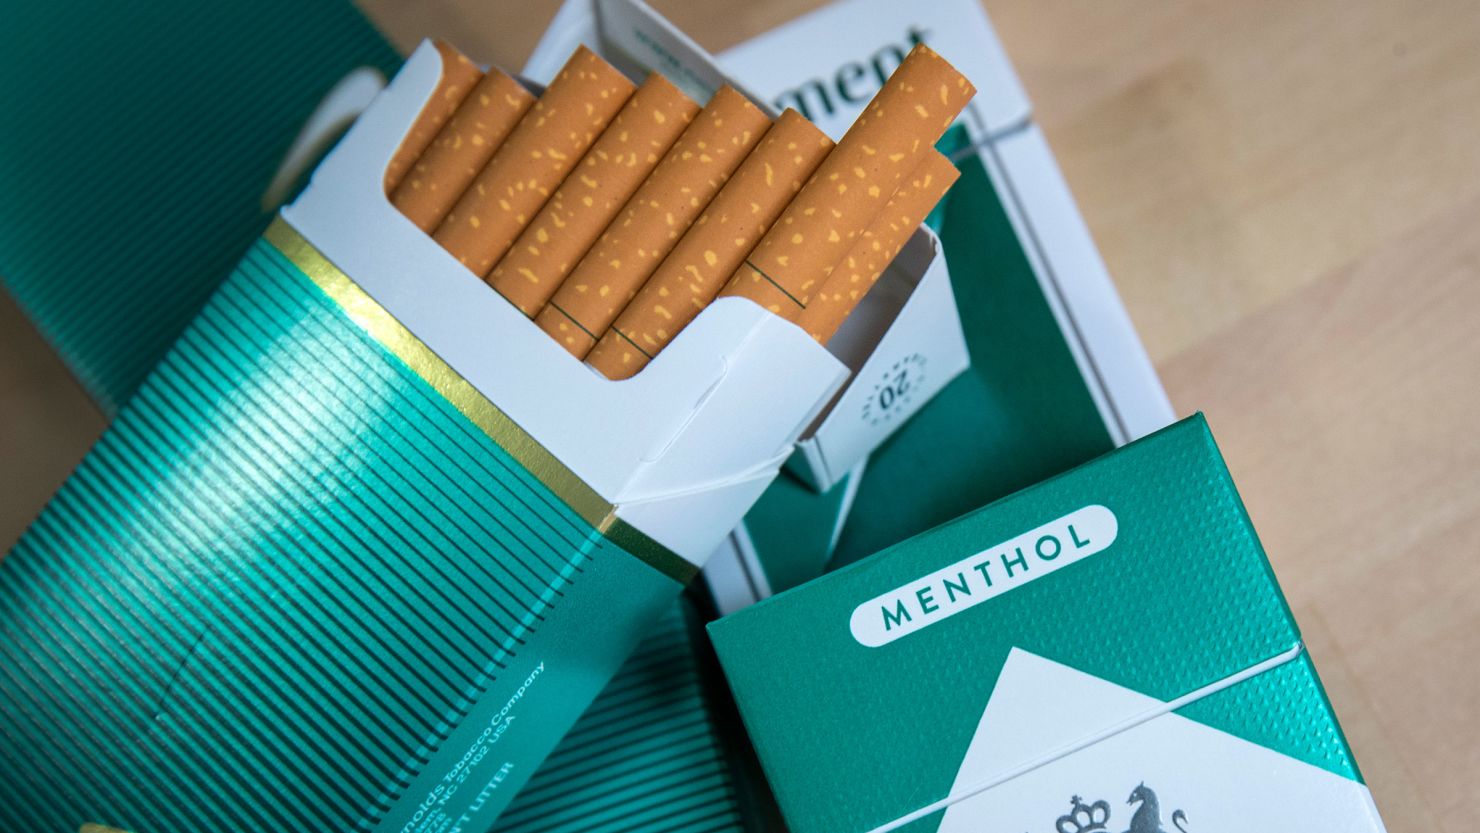 Packs of menthol cigarettes are seen in this 2018 file photo.